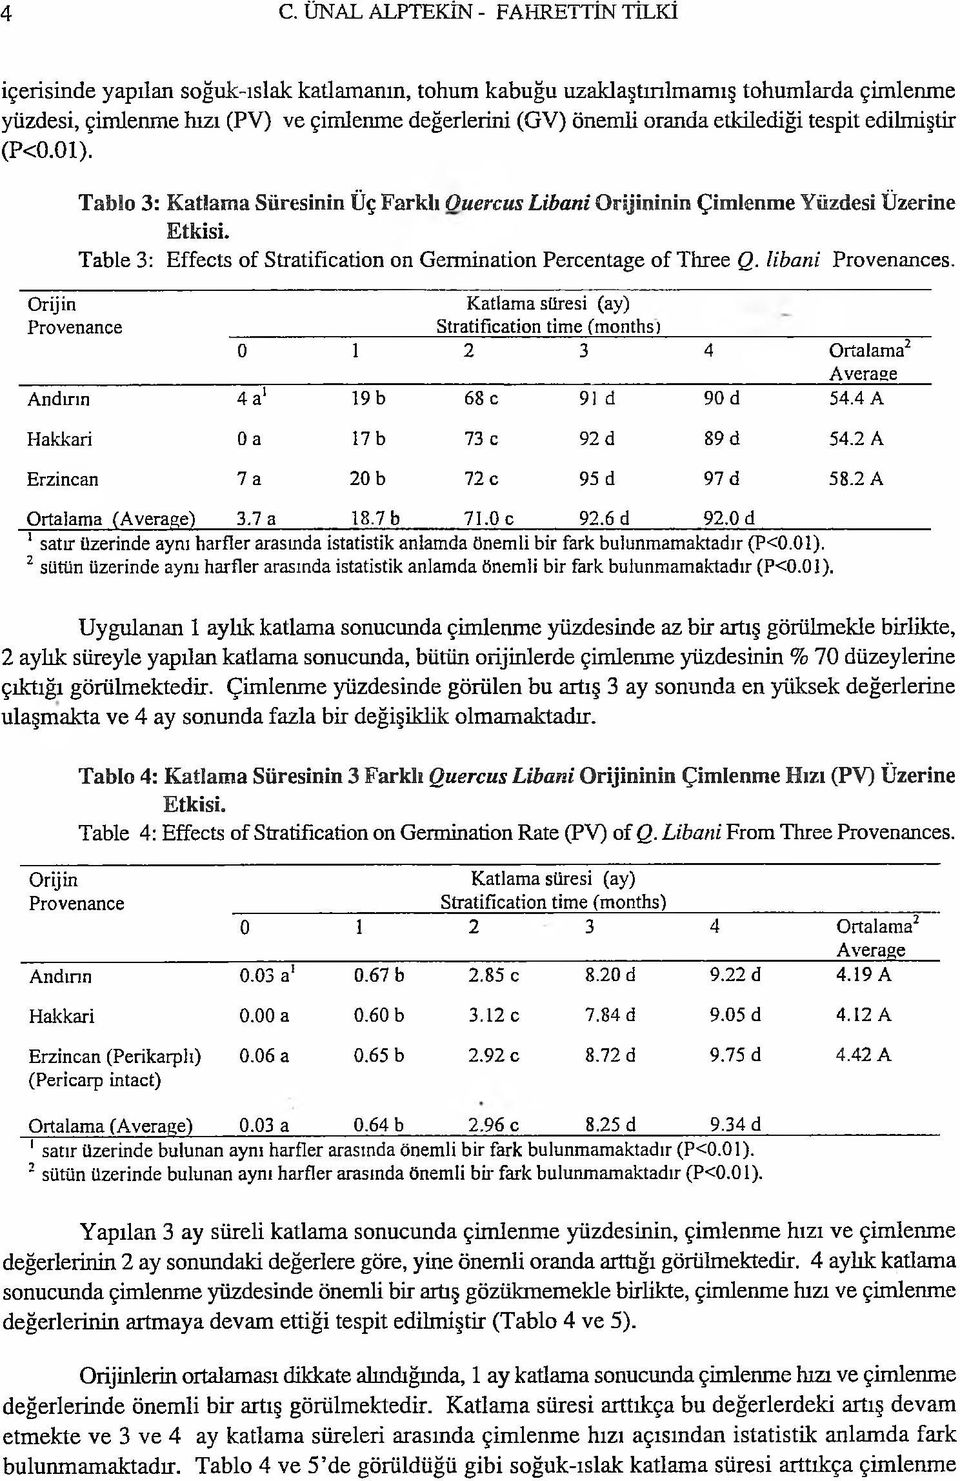 Table 3: Effects of Stratification on Germination Percentage of Three Q. libani Provenances.